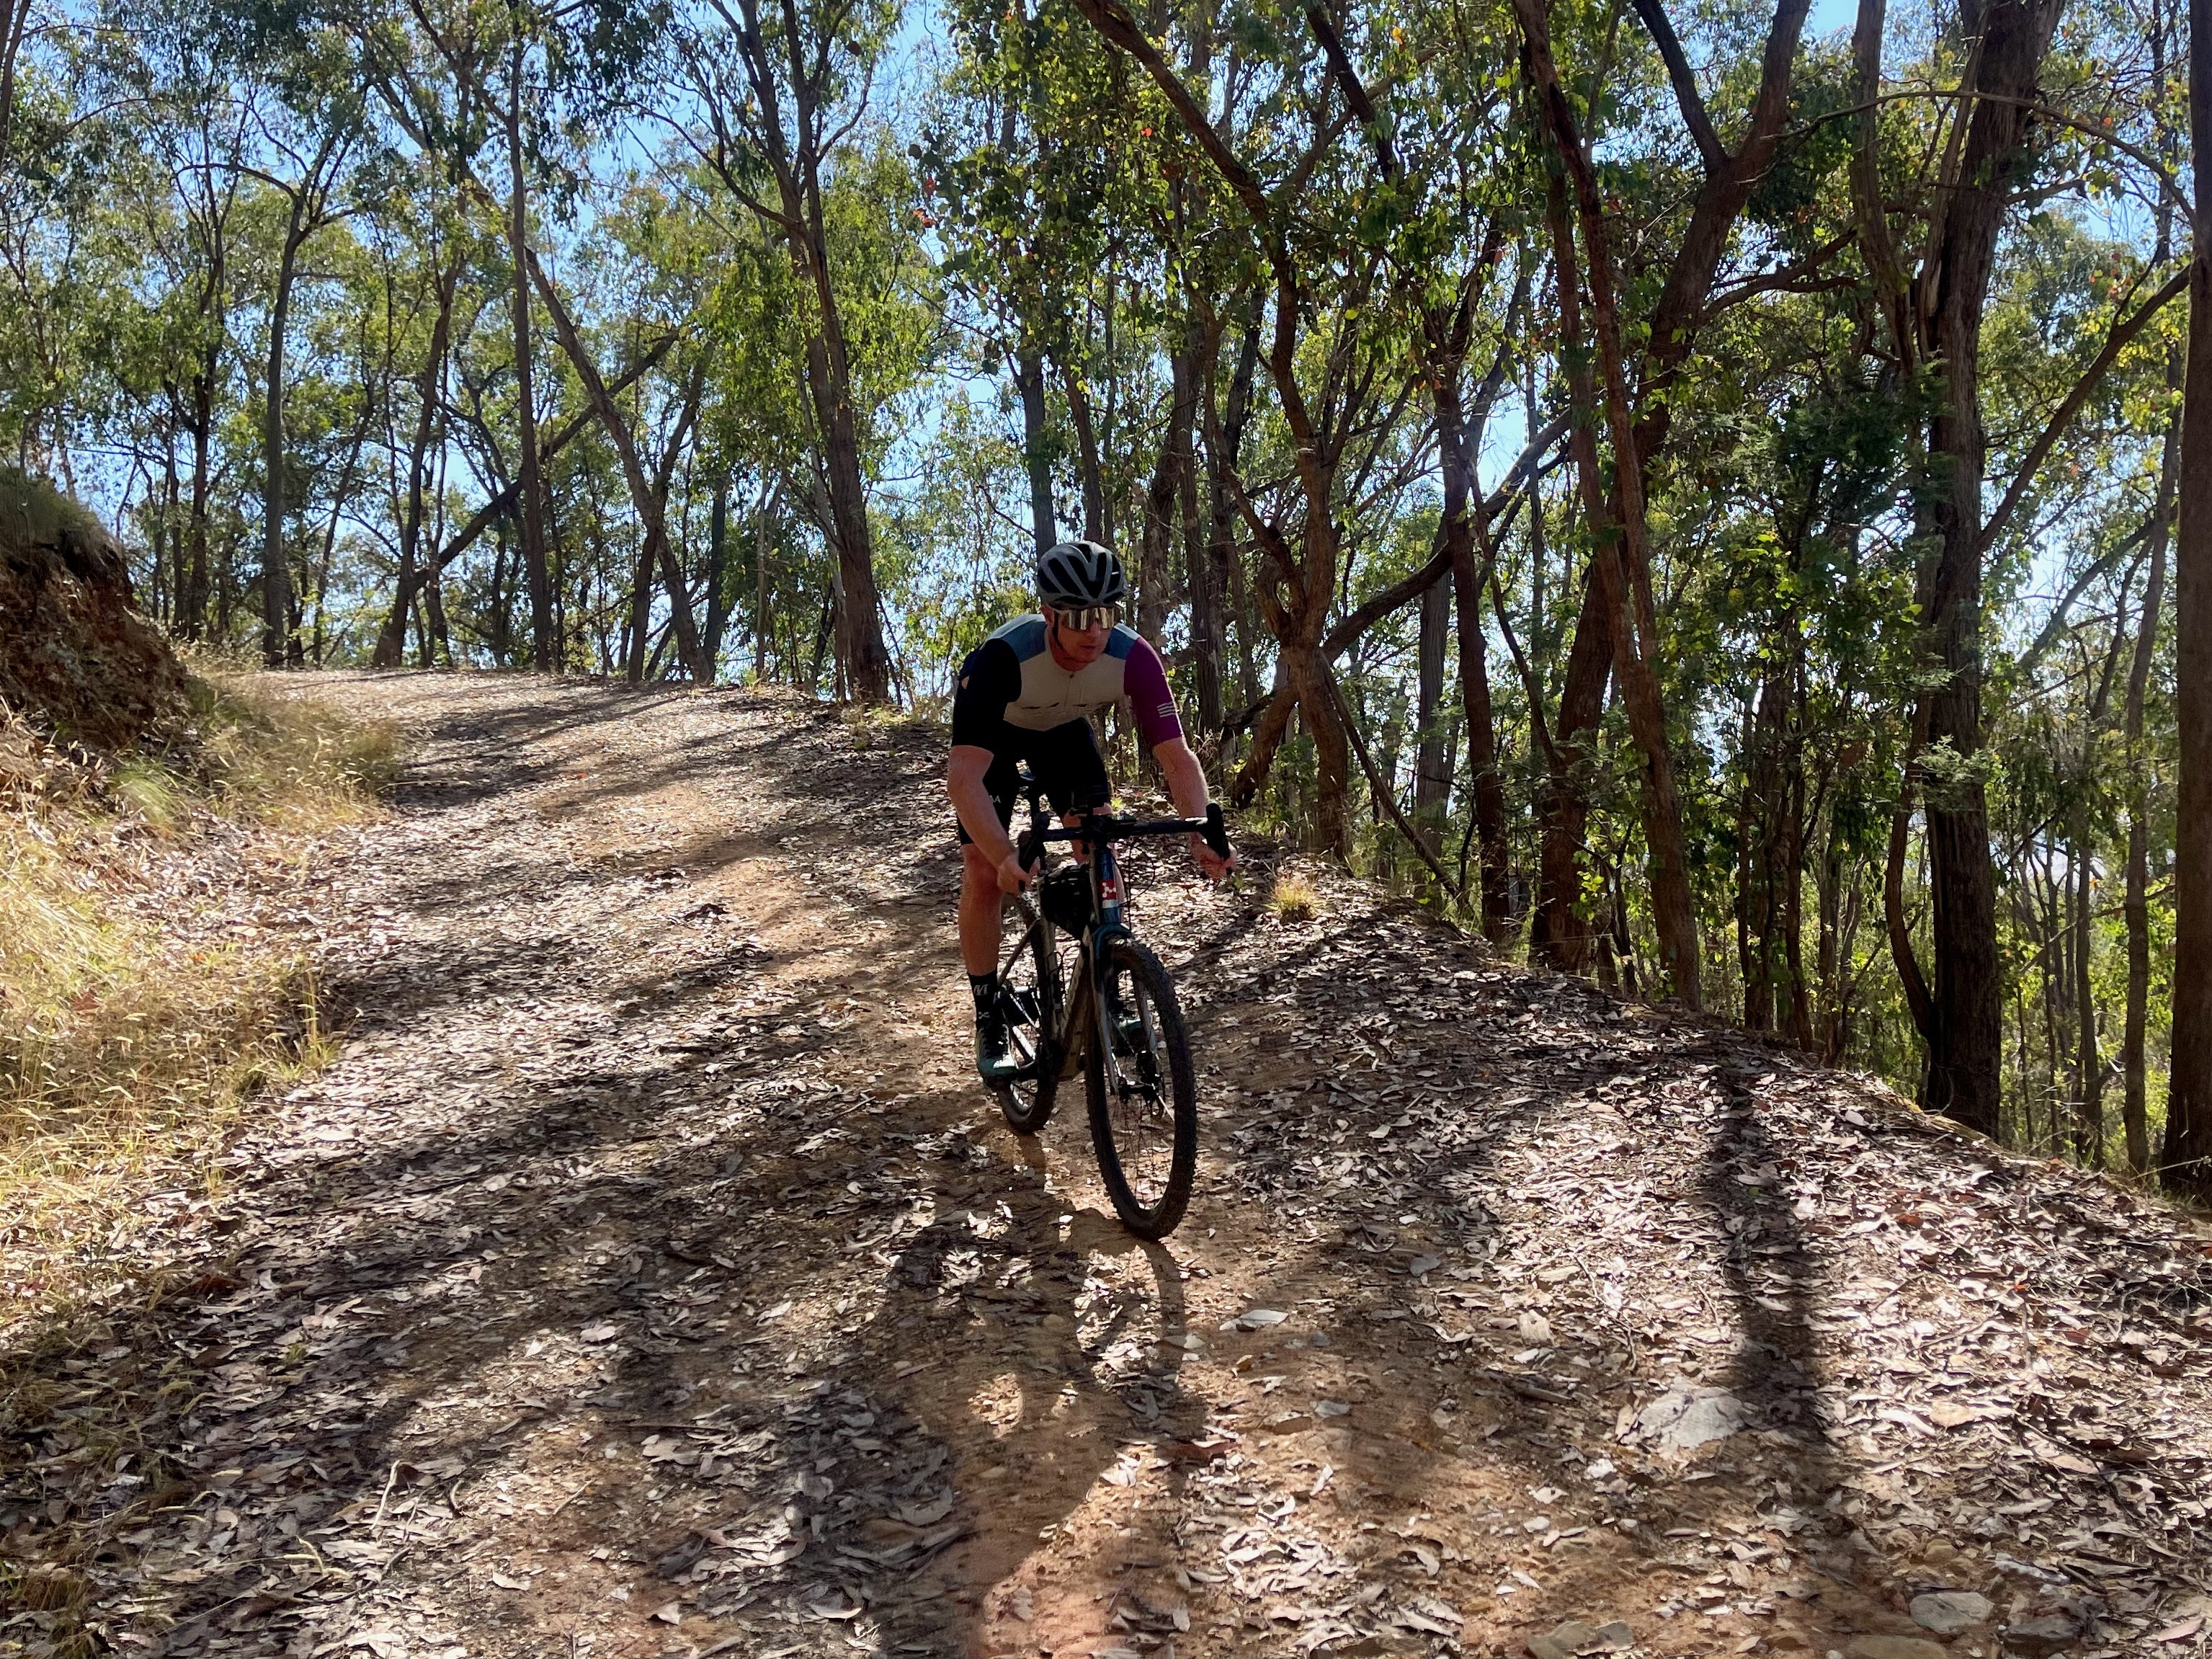 Cyclist in an athletic position on a gravel bike descending down a dirt track through native bushland on a sunny day